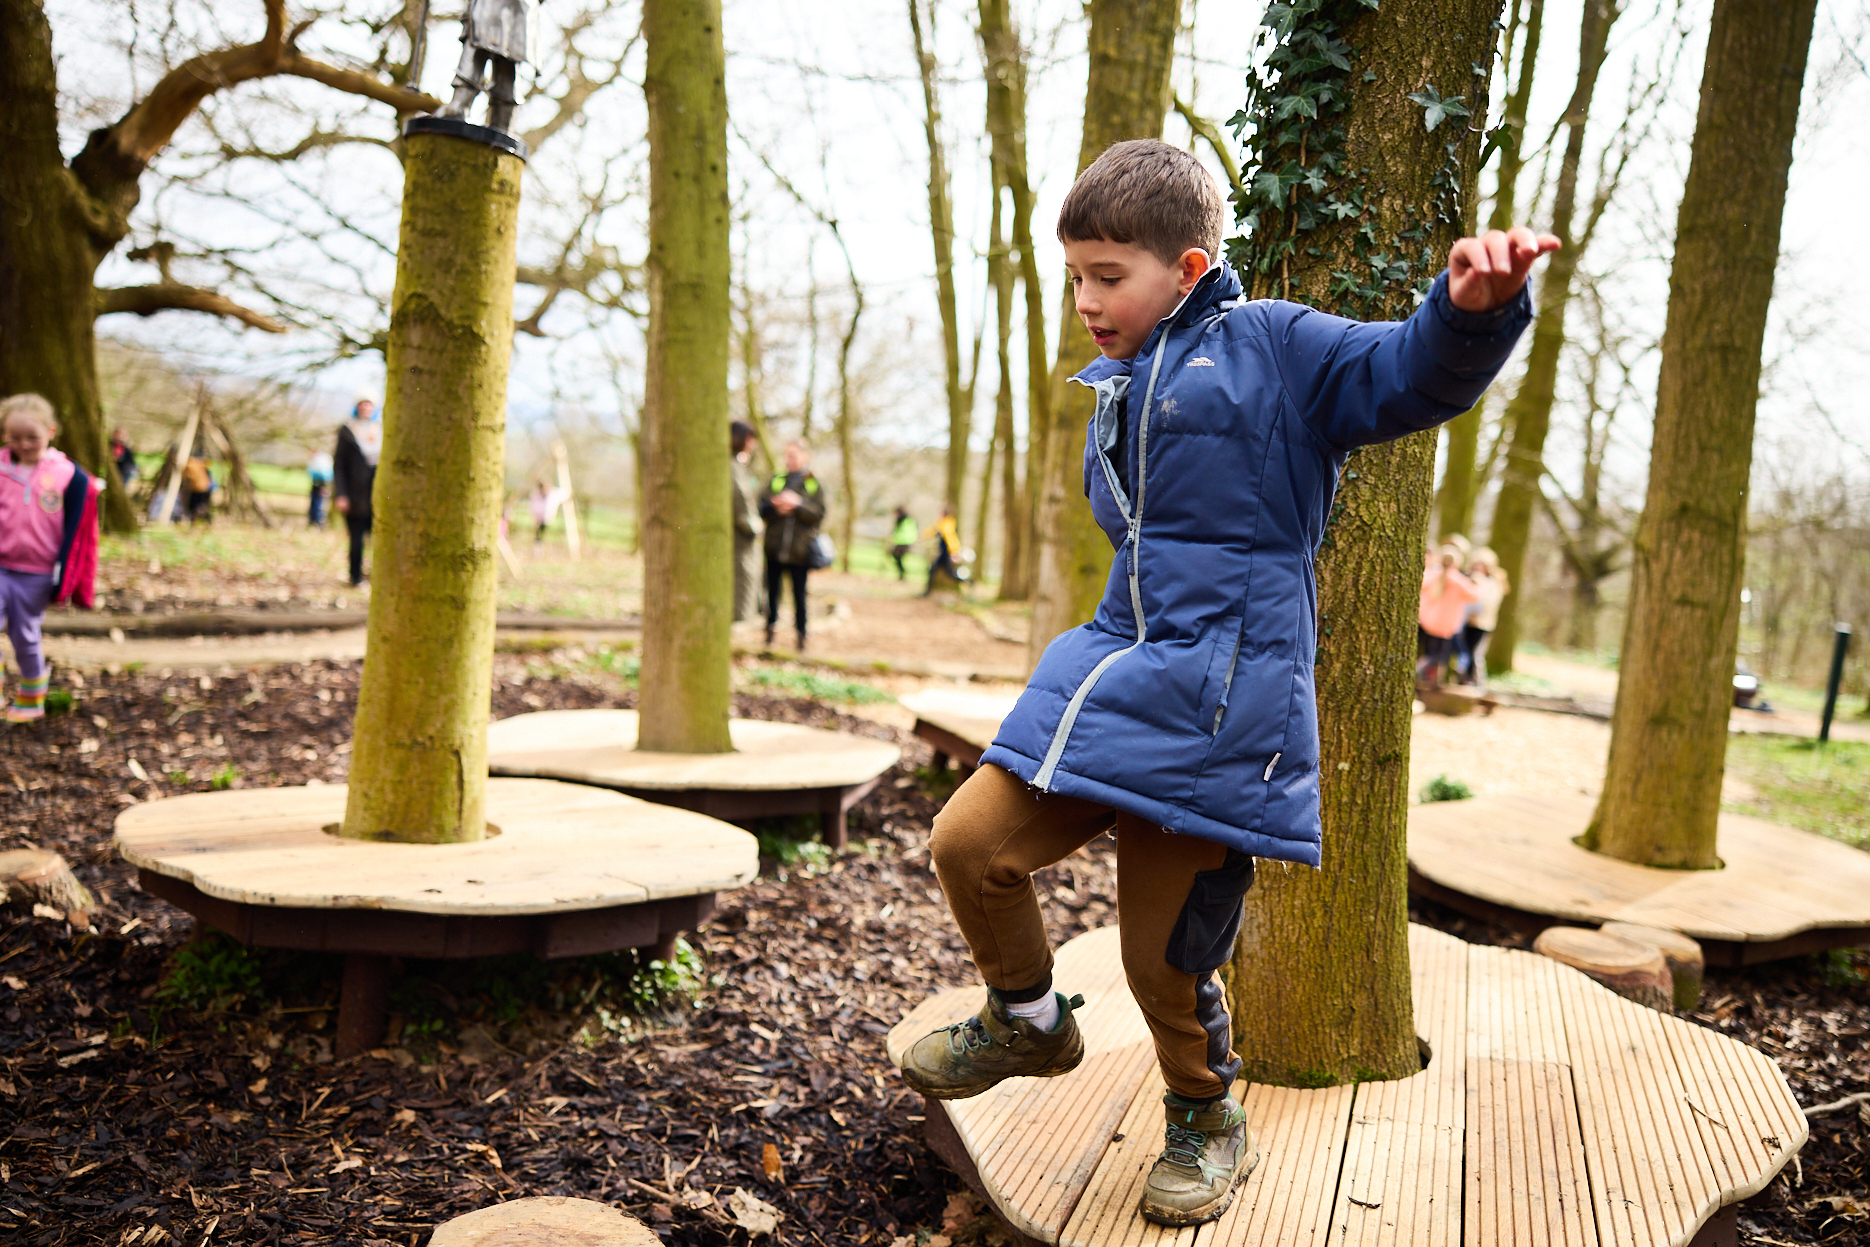 A child jumping from a wooden platform in a woodland play area.